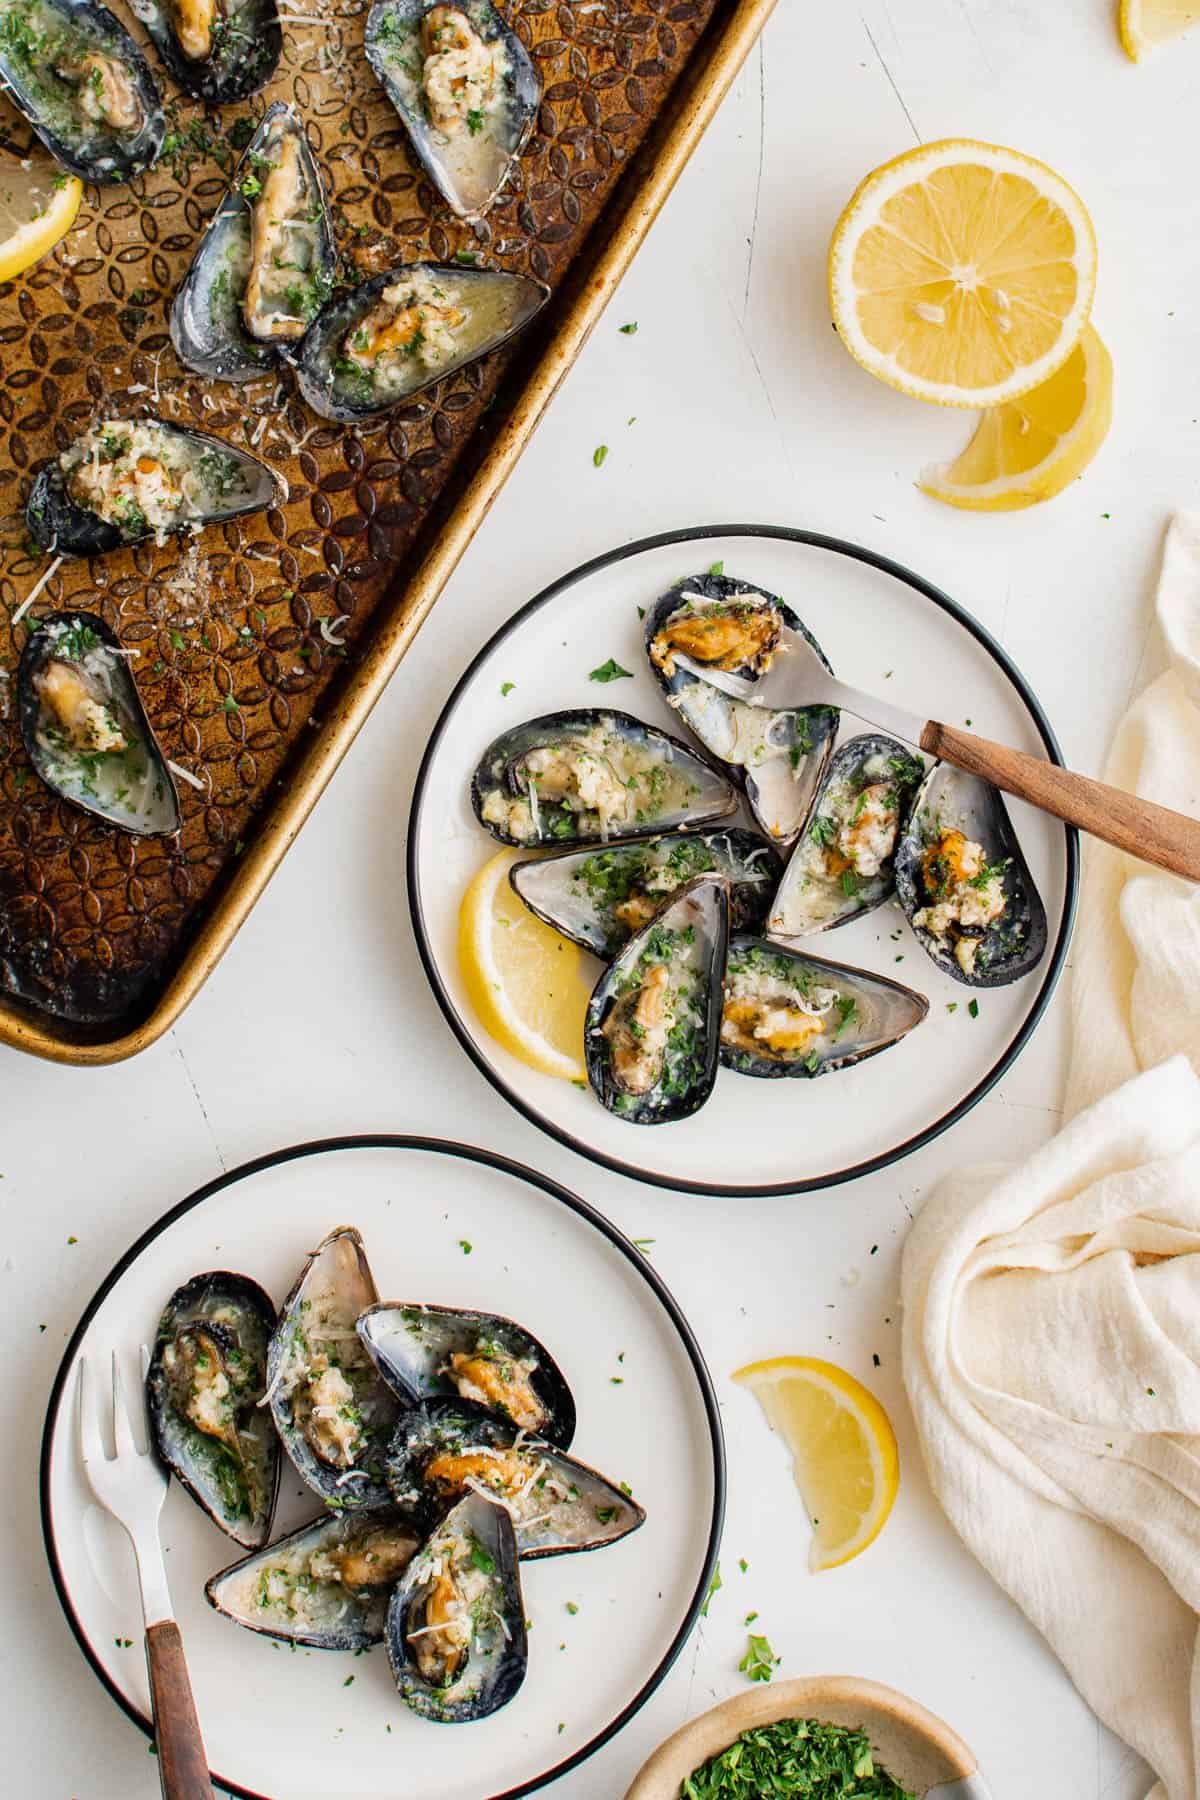 Baked mussels in garlic butter arranged on white plates for serving with lemon wedges.